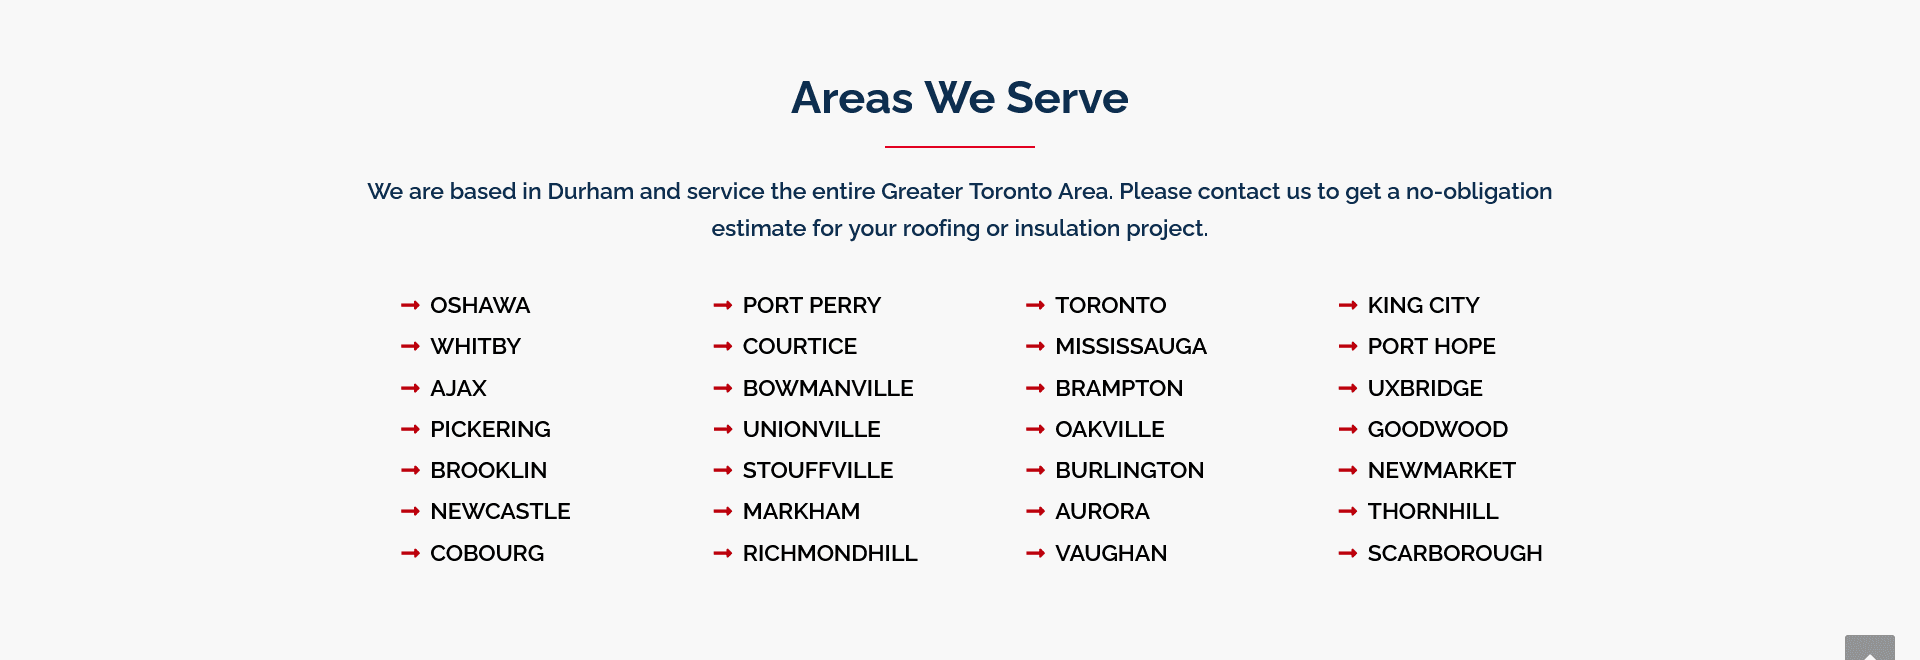 Areas we serve graphic showing Local SEO on a website